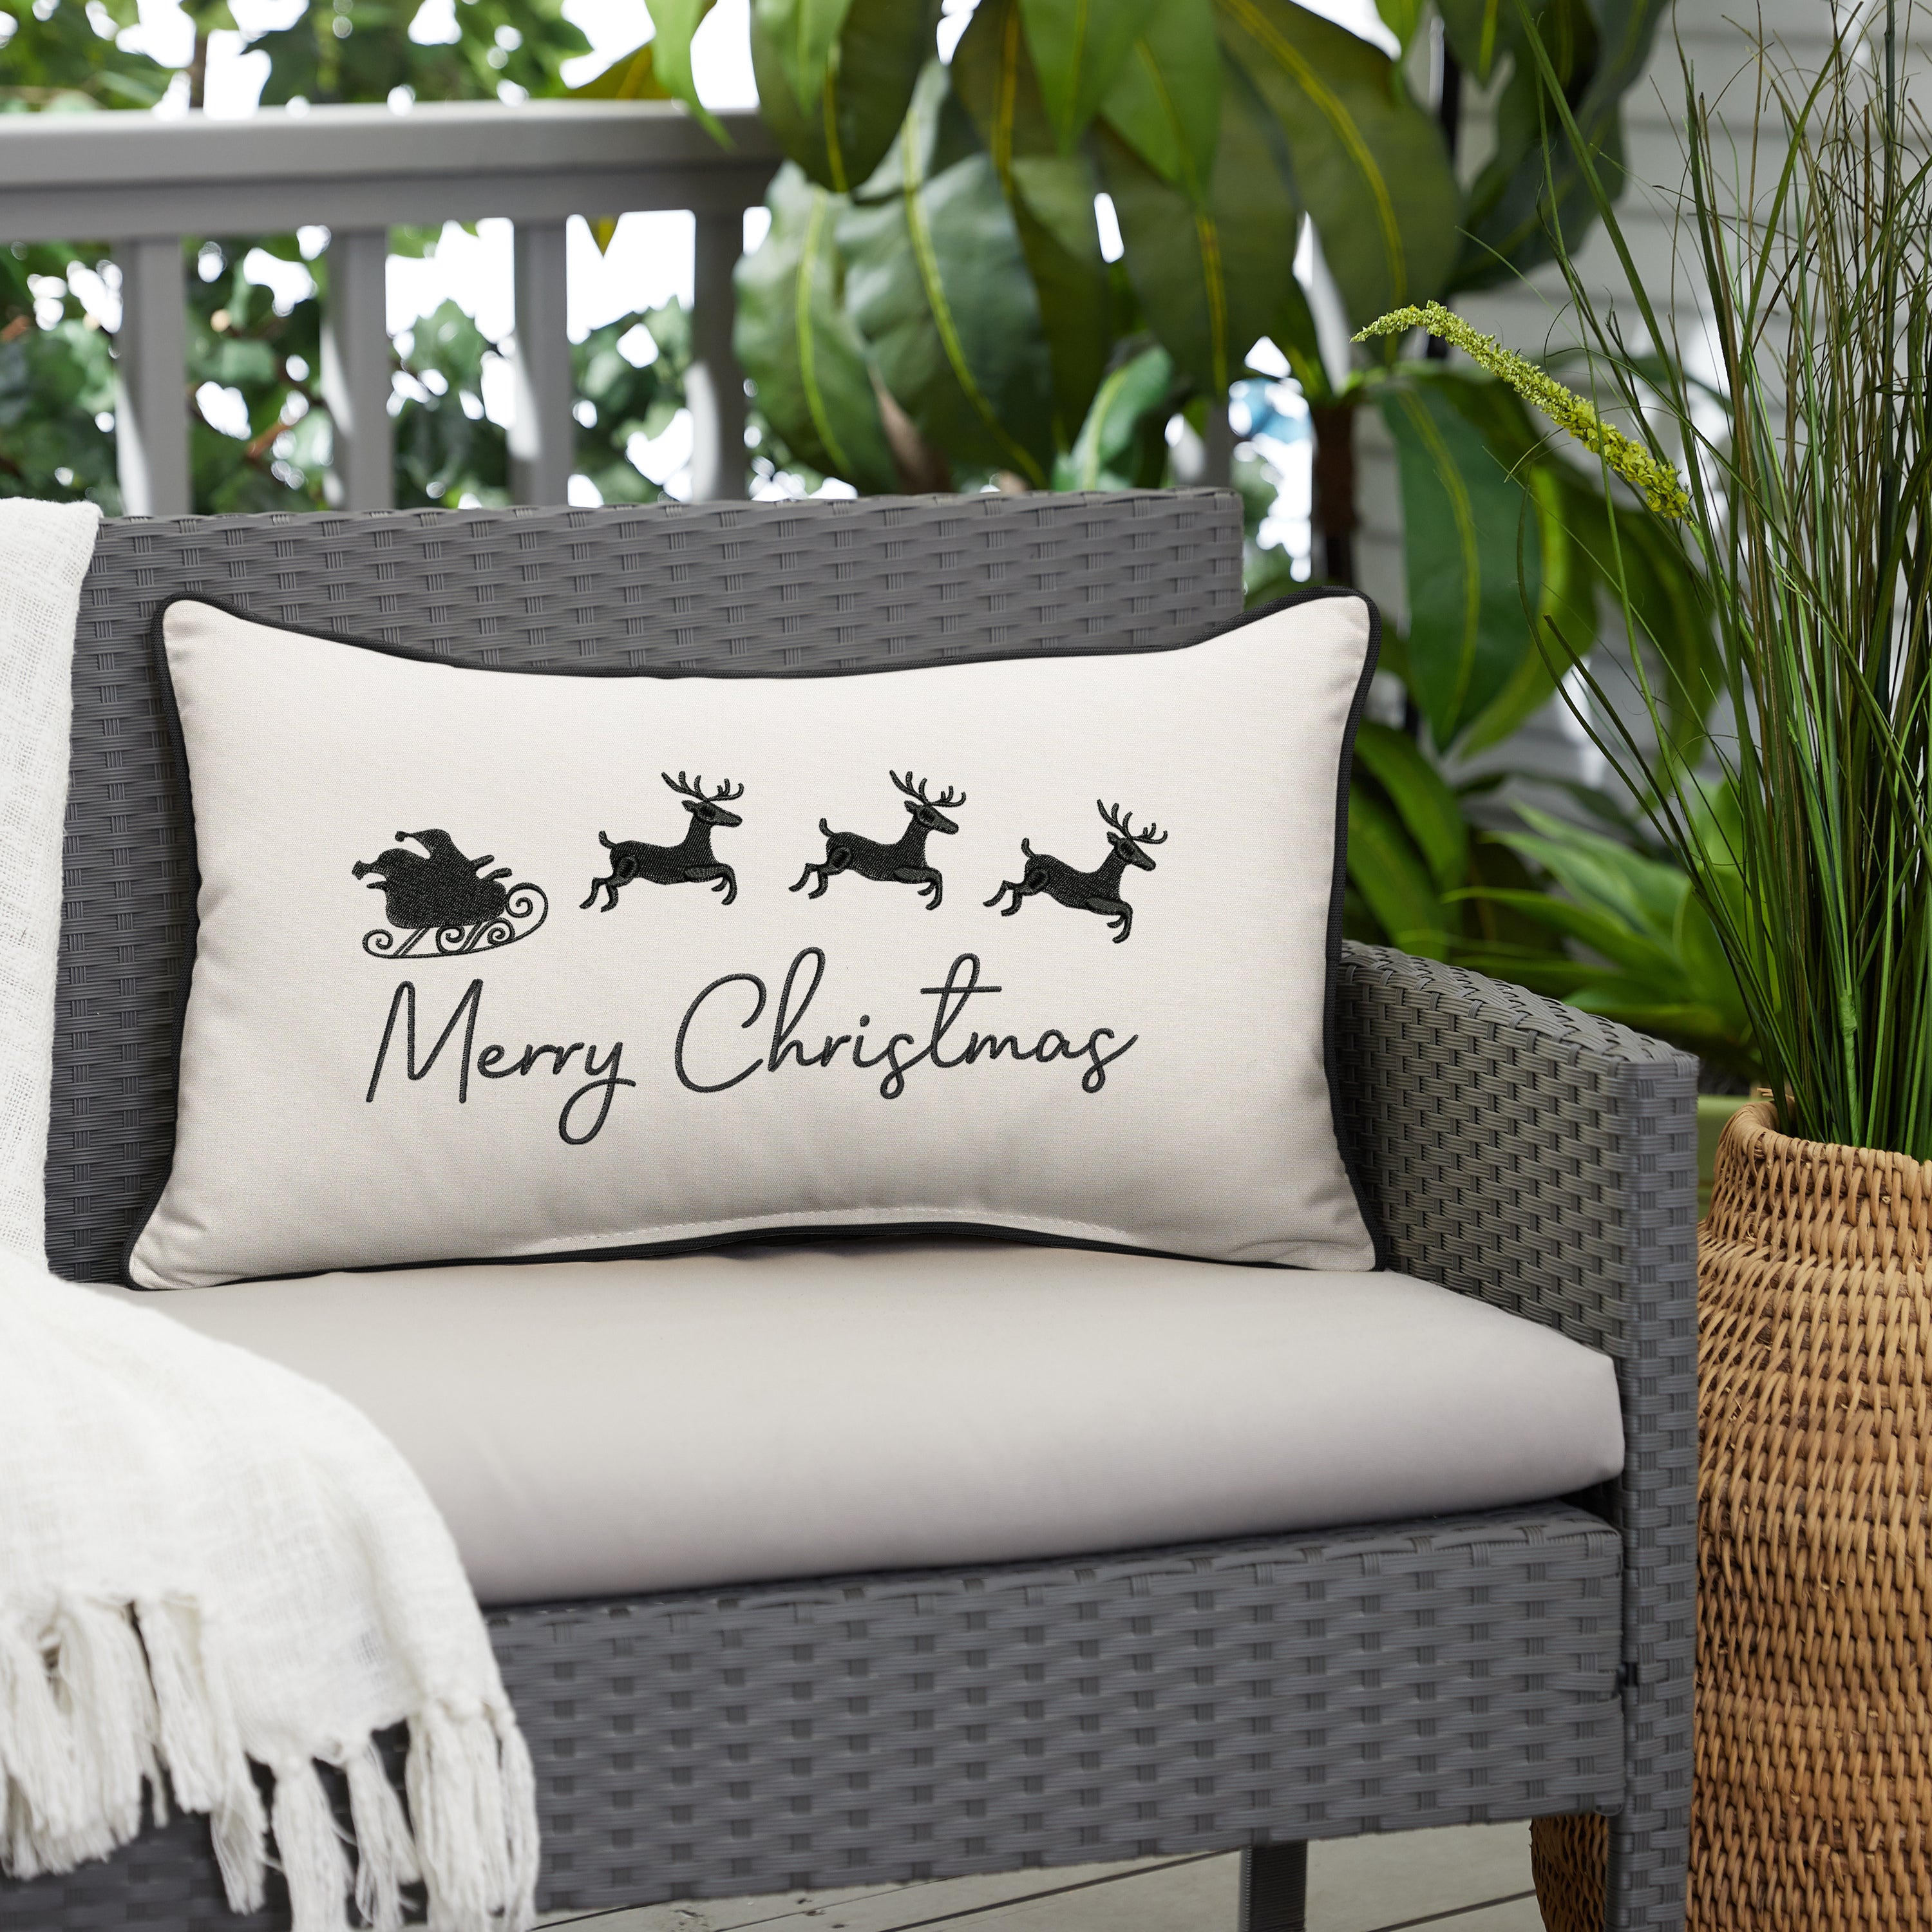 Sunbrella Rectangle Holiday Embroidered Outdoor Pillow